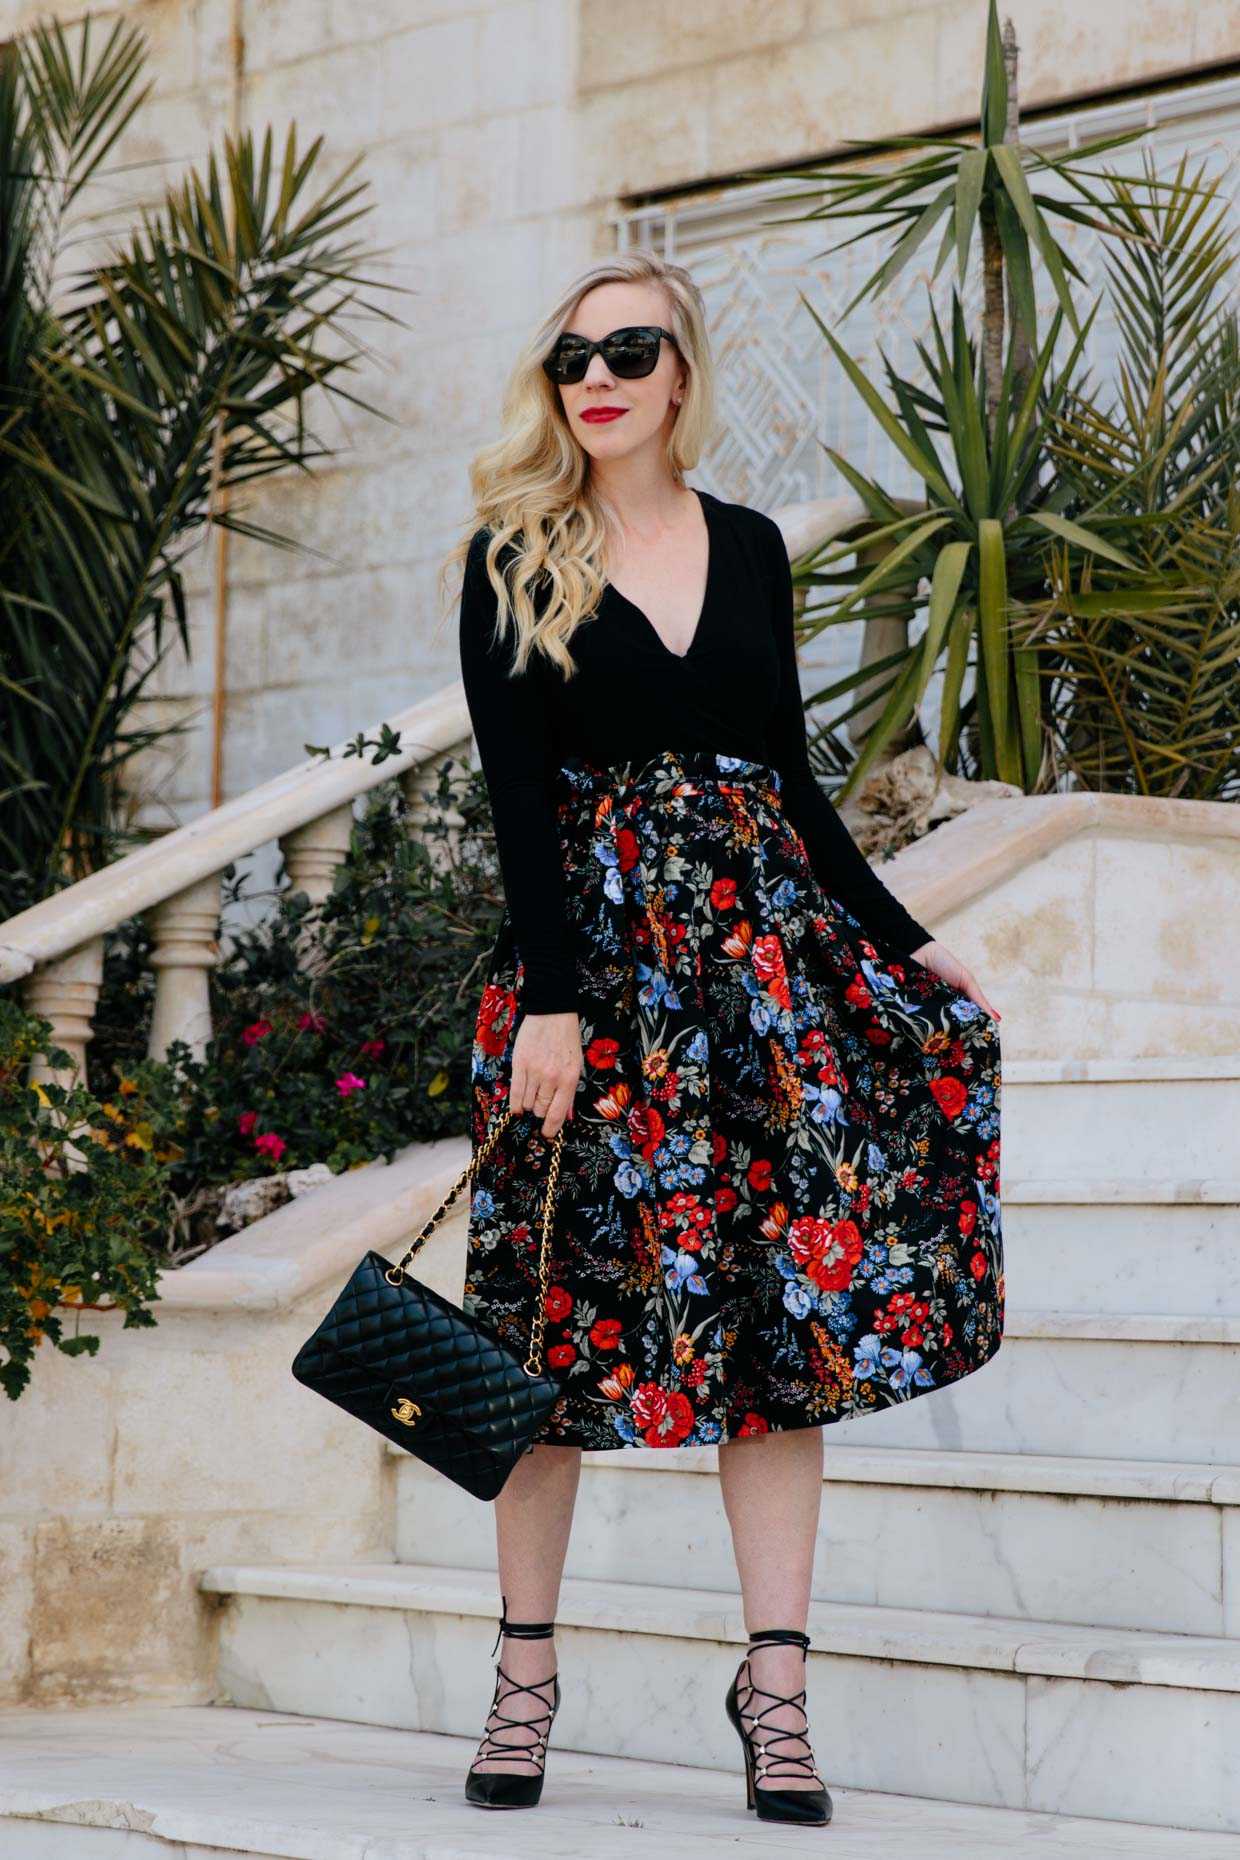 floral skirt outfit